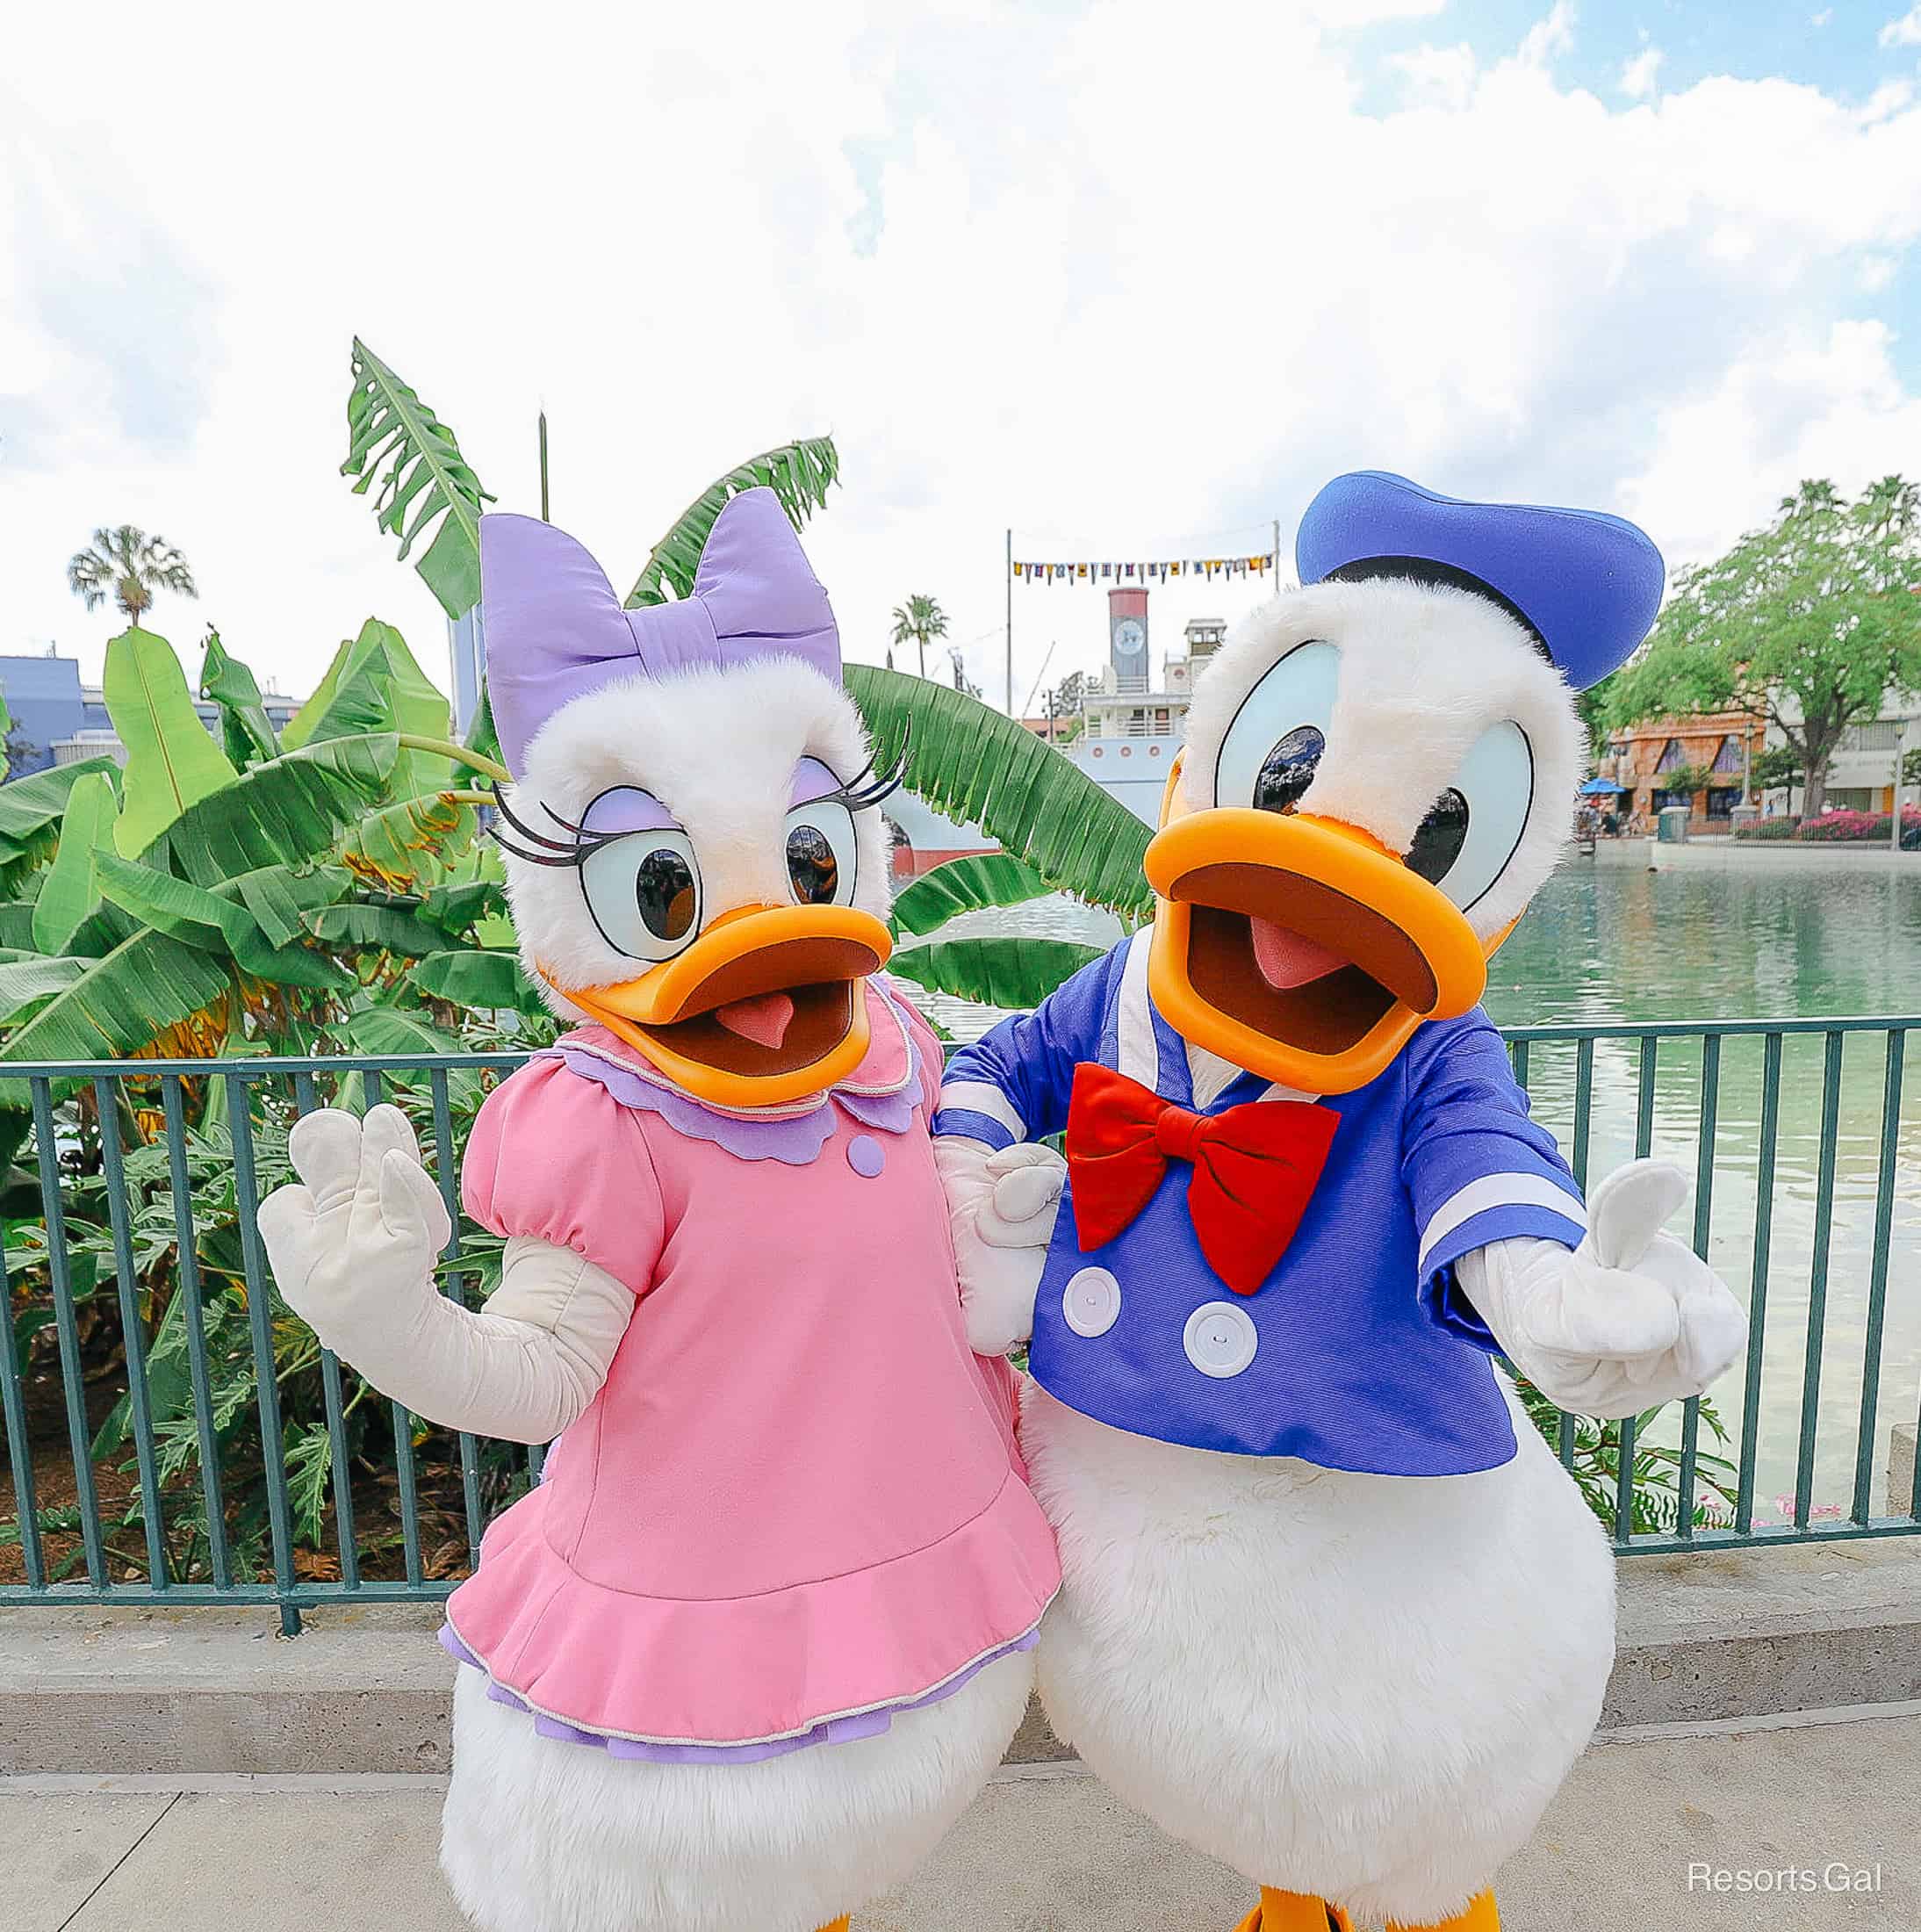 Donald and Daisy Duck meeting together again. 